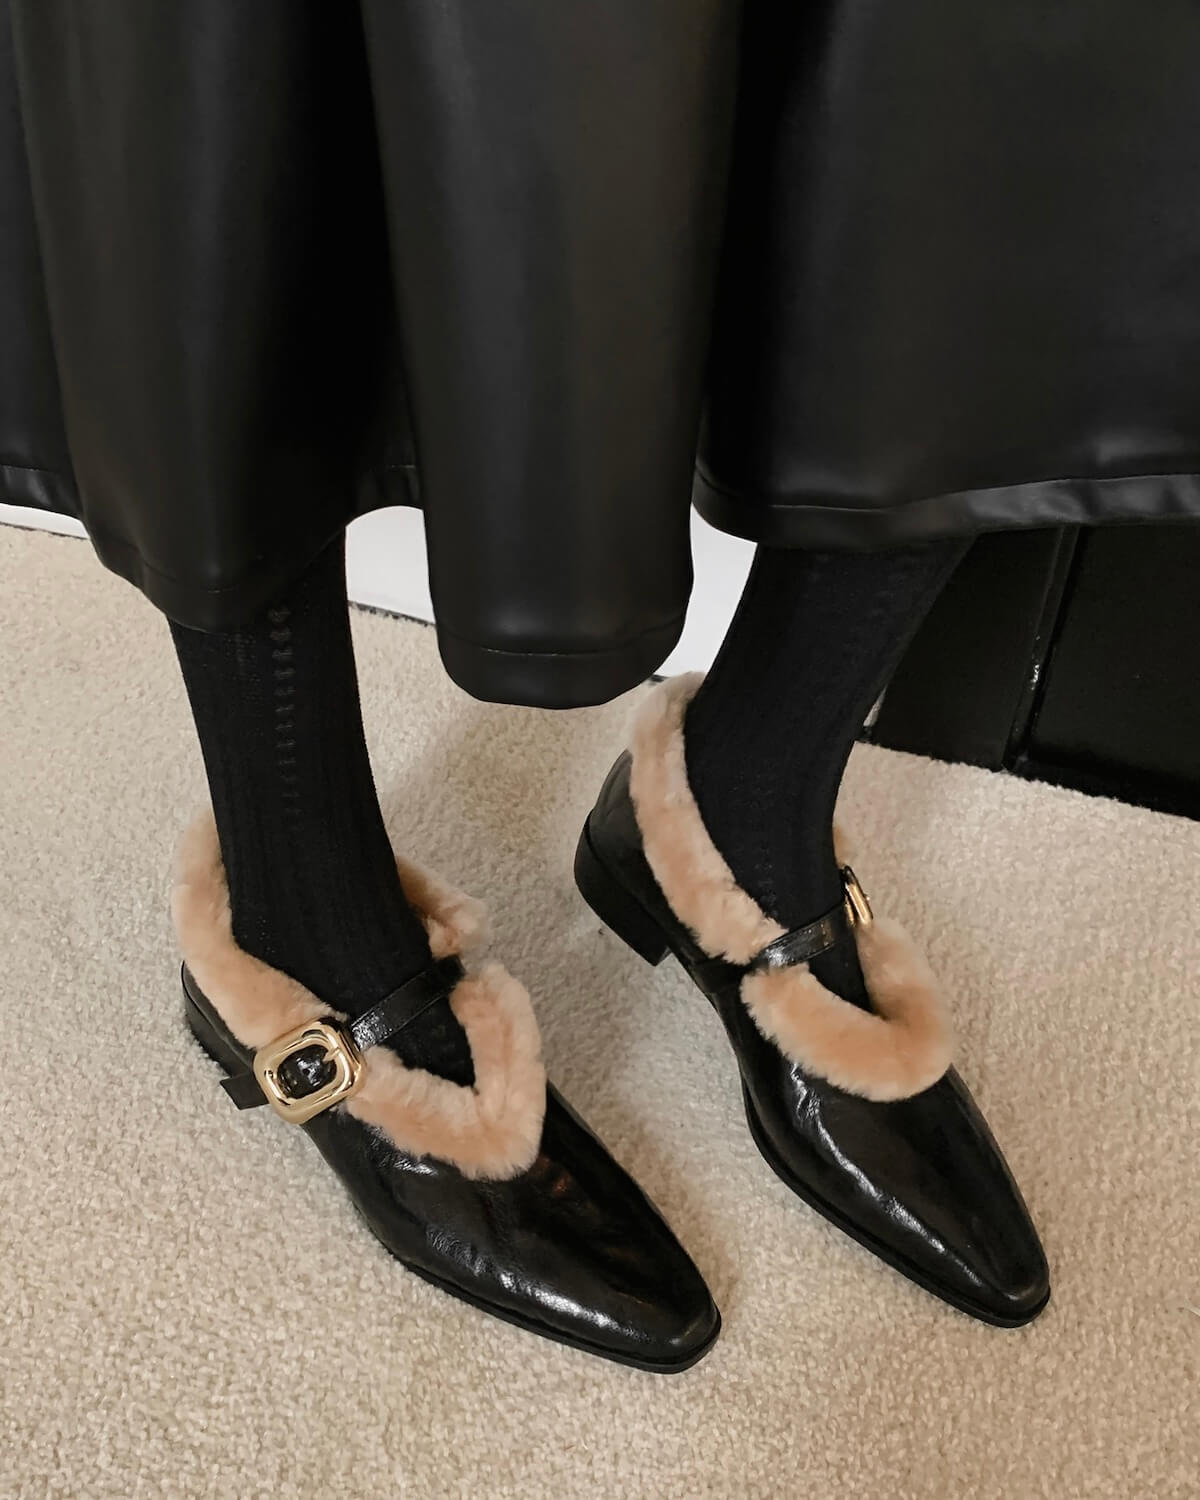 Monte - Fur Lined Loafers